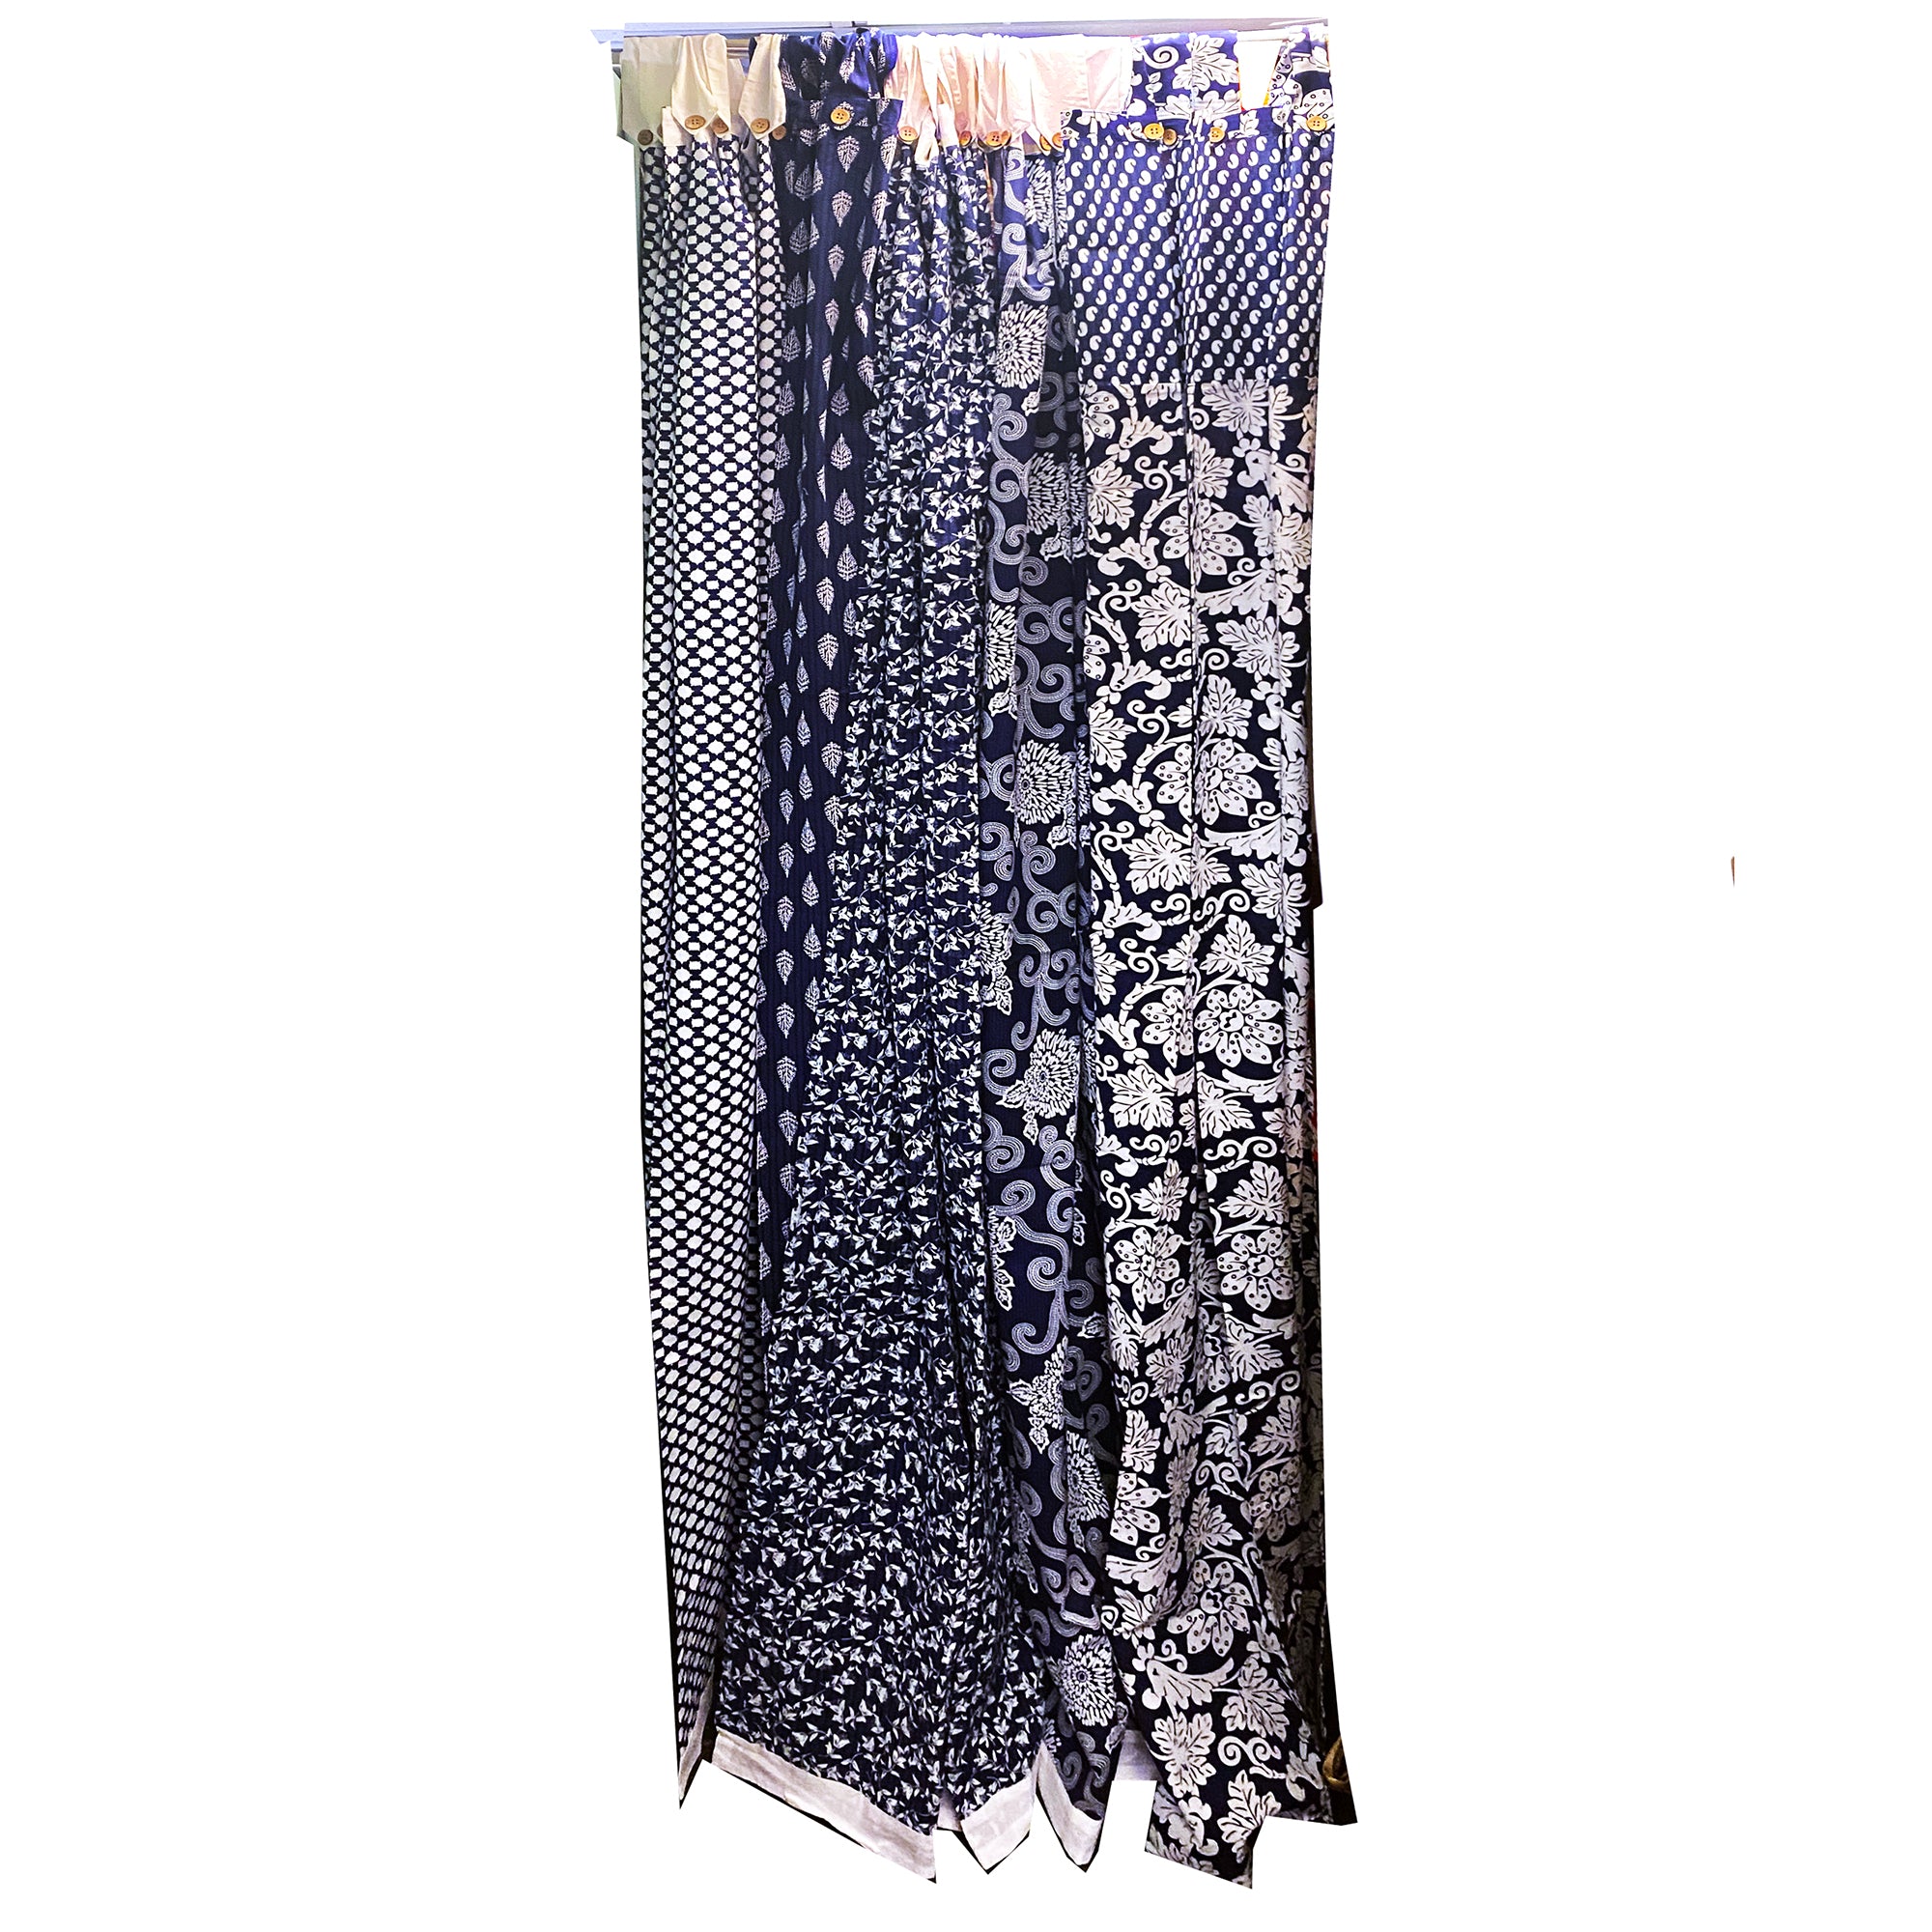 Navy & White Cotton Curtain Pair-5 Patterns - Vintage India NYC